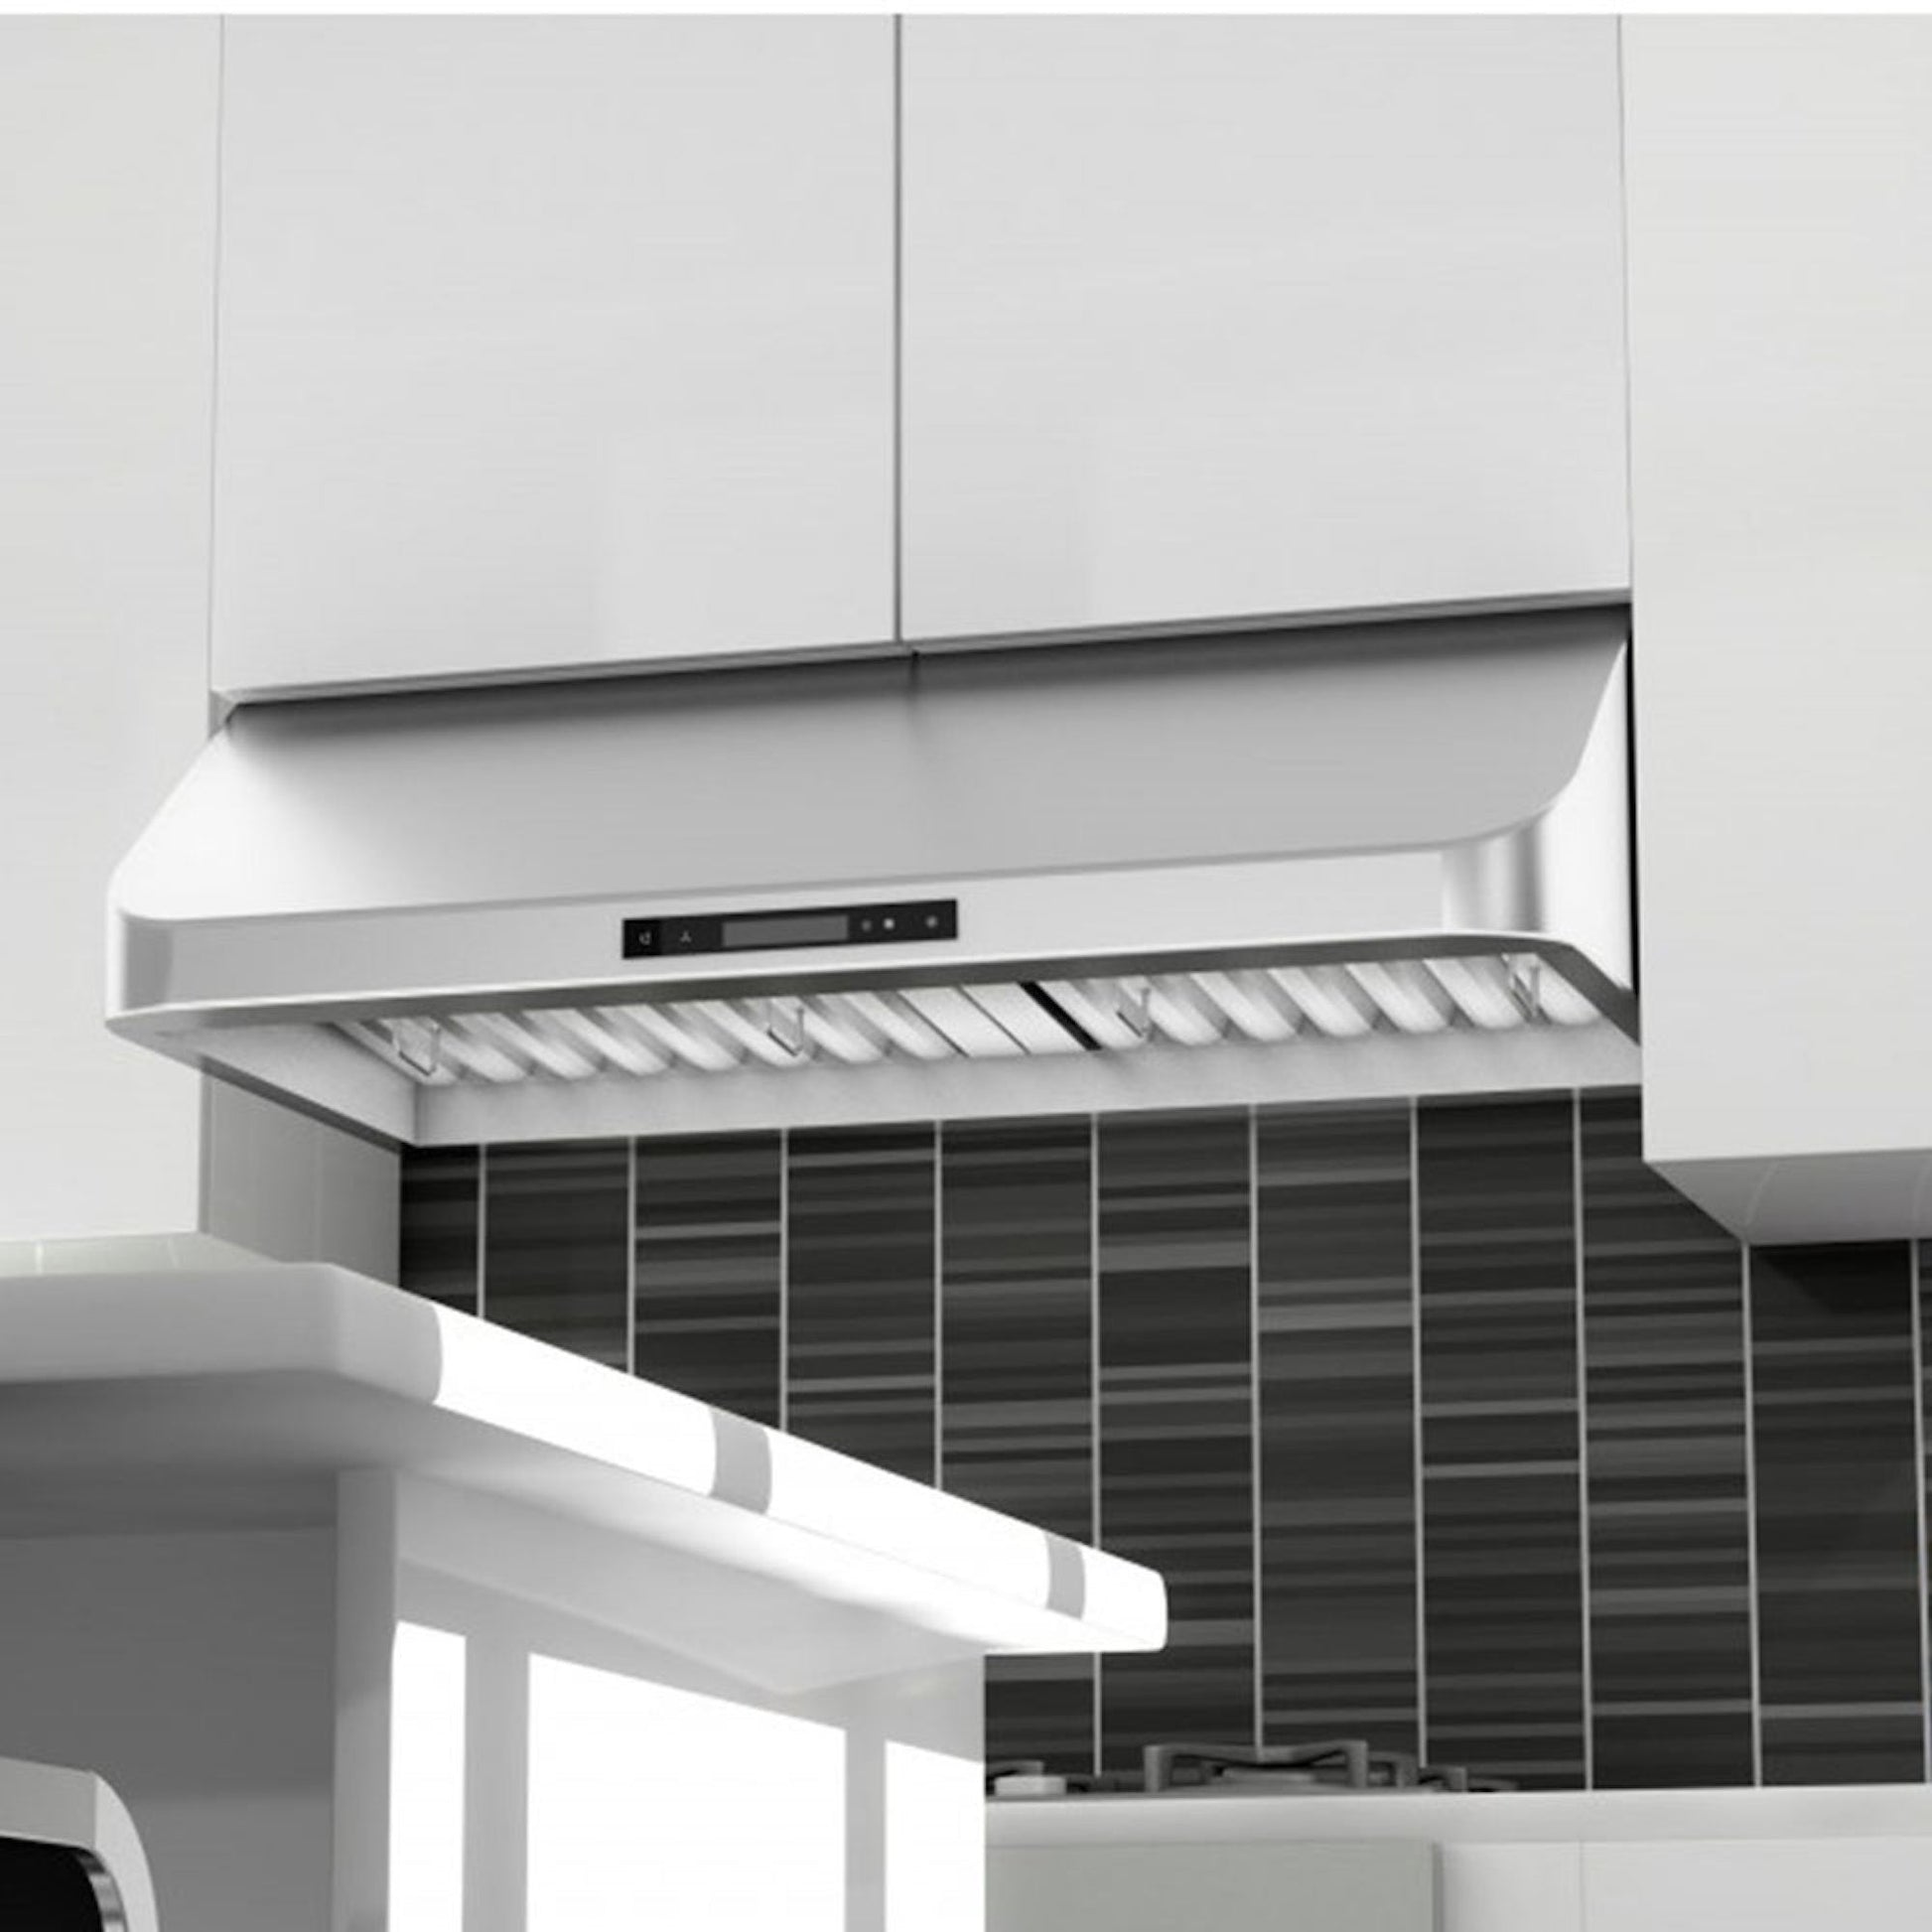 ZLINE Ducted Under Cabinet Range Hood - Stainless Stee